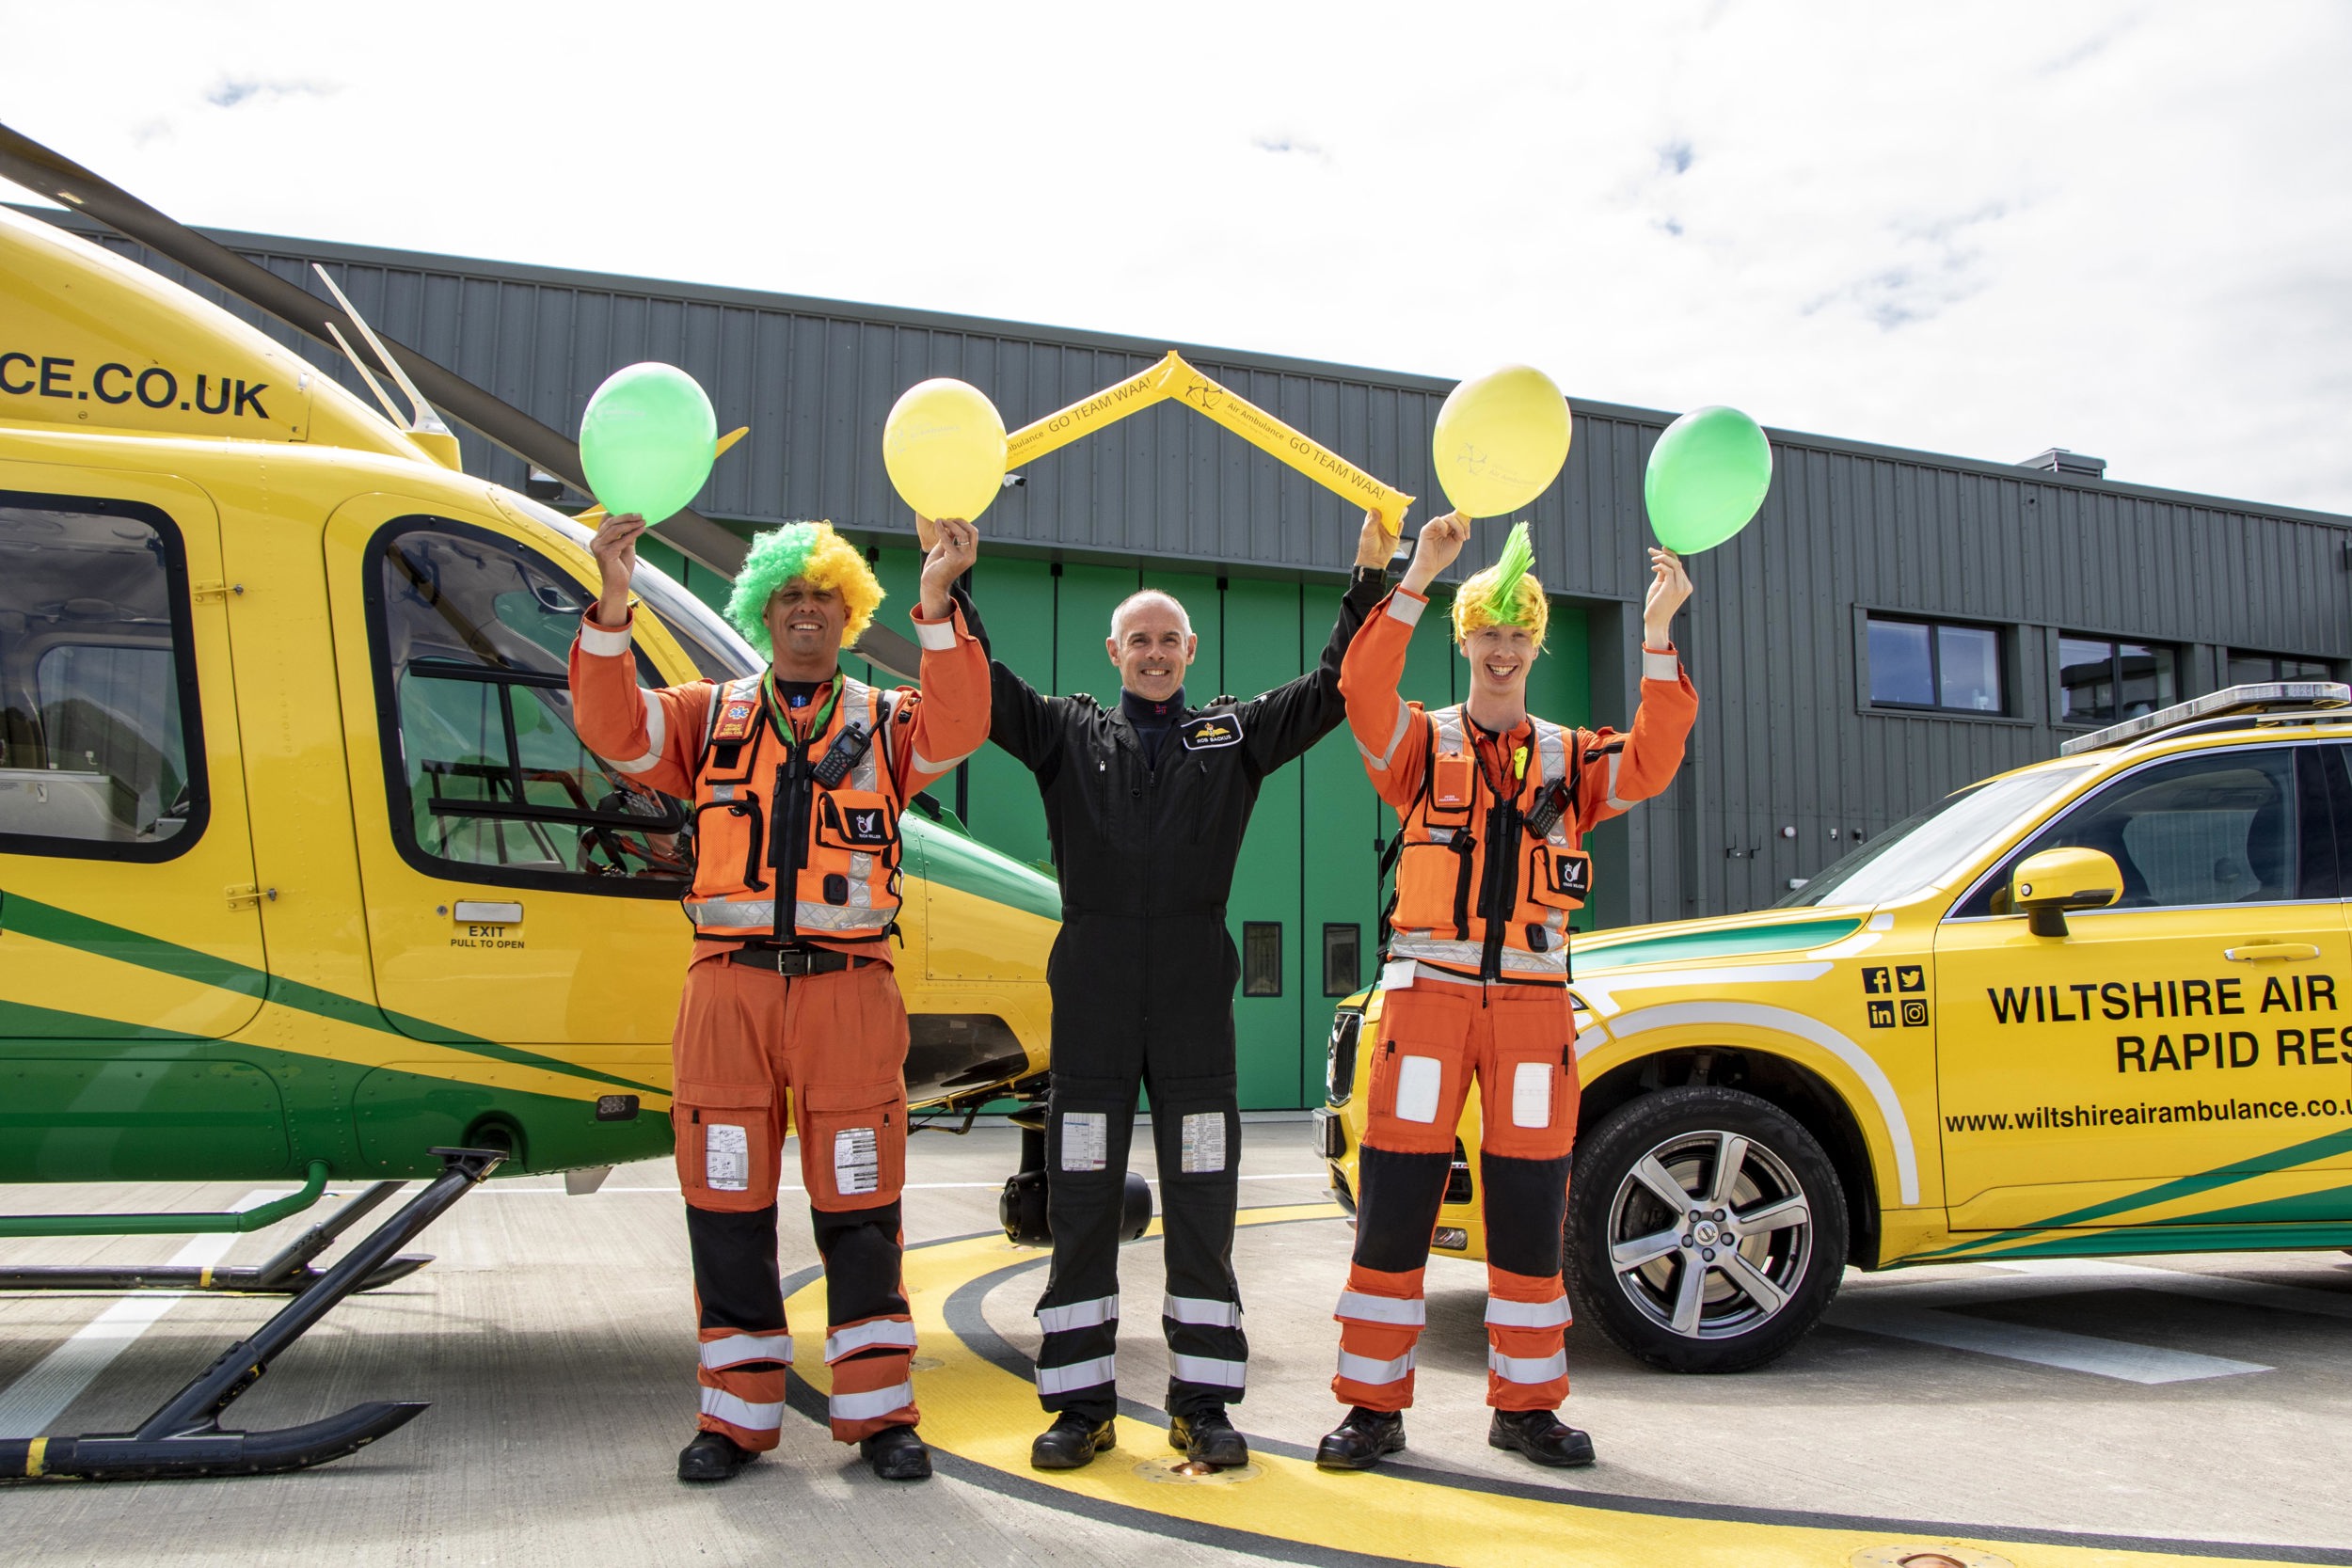 Paramedic Rich Miller wearing a yellow and green curly wig and holding yellow and green balloons, Rob Backus holding yellow Team WAA cheer sticks and Craig Wilkins wearing a yellow and green mohawk wig and holding yellow and green balloons